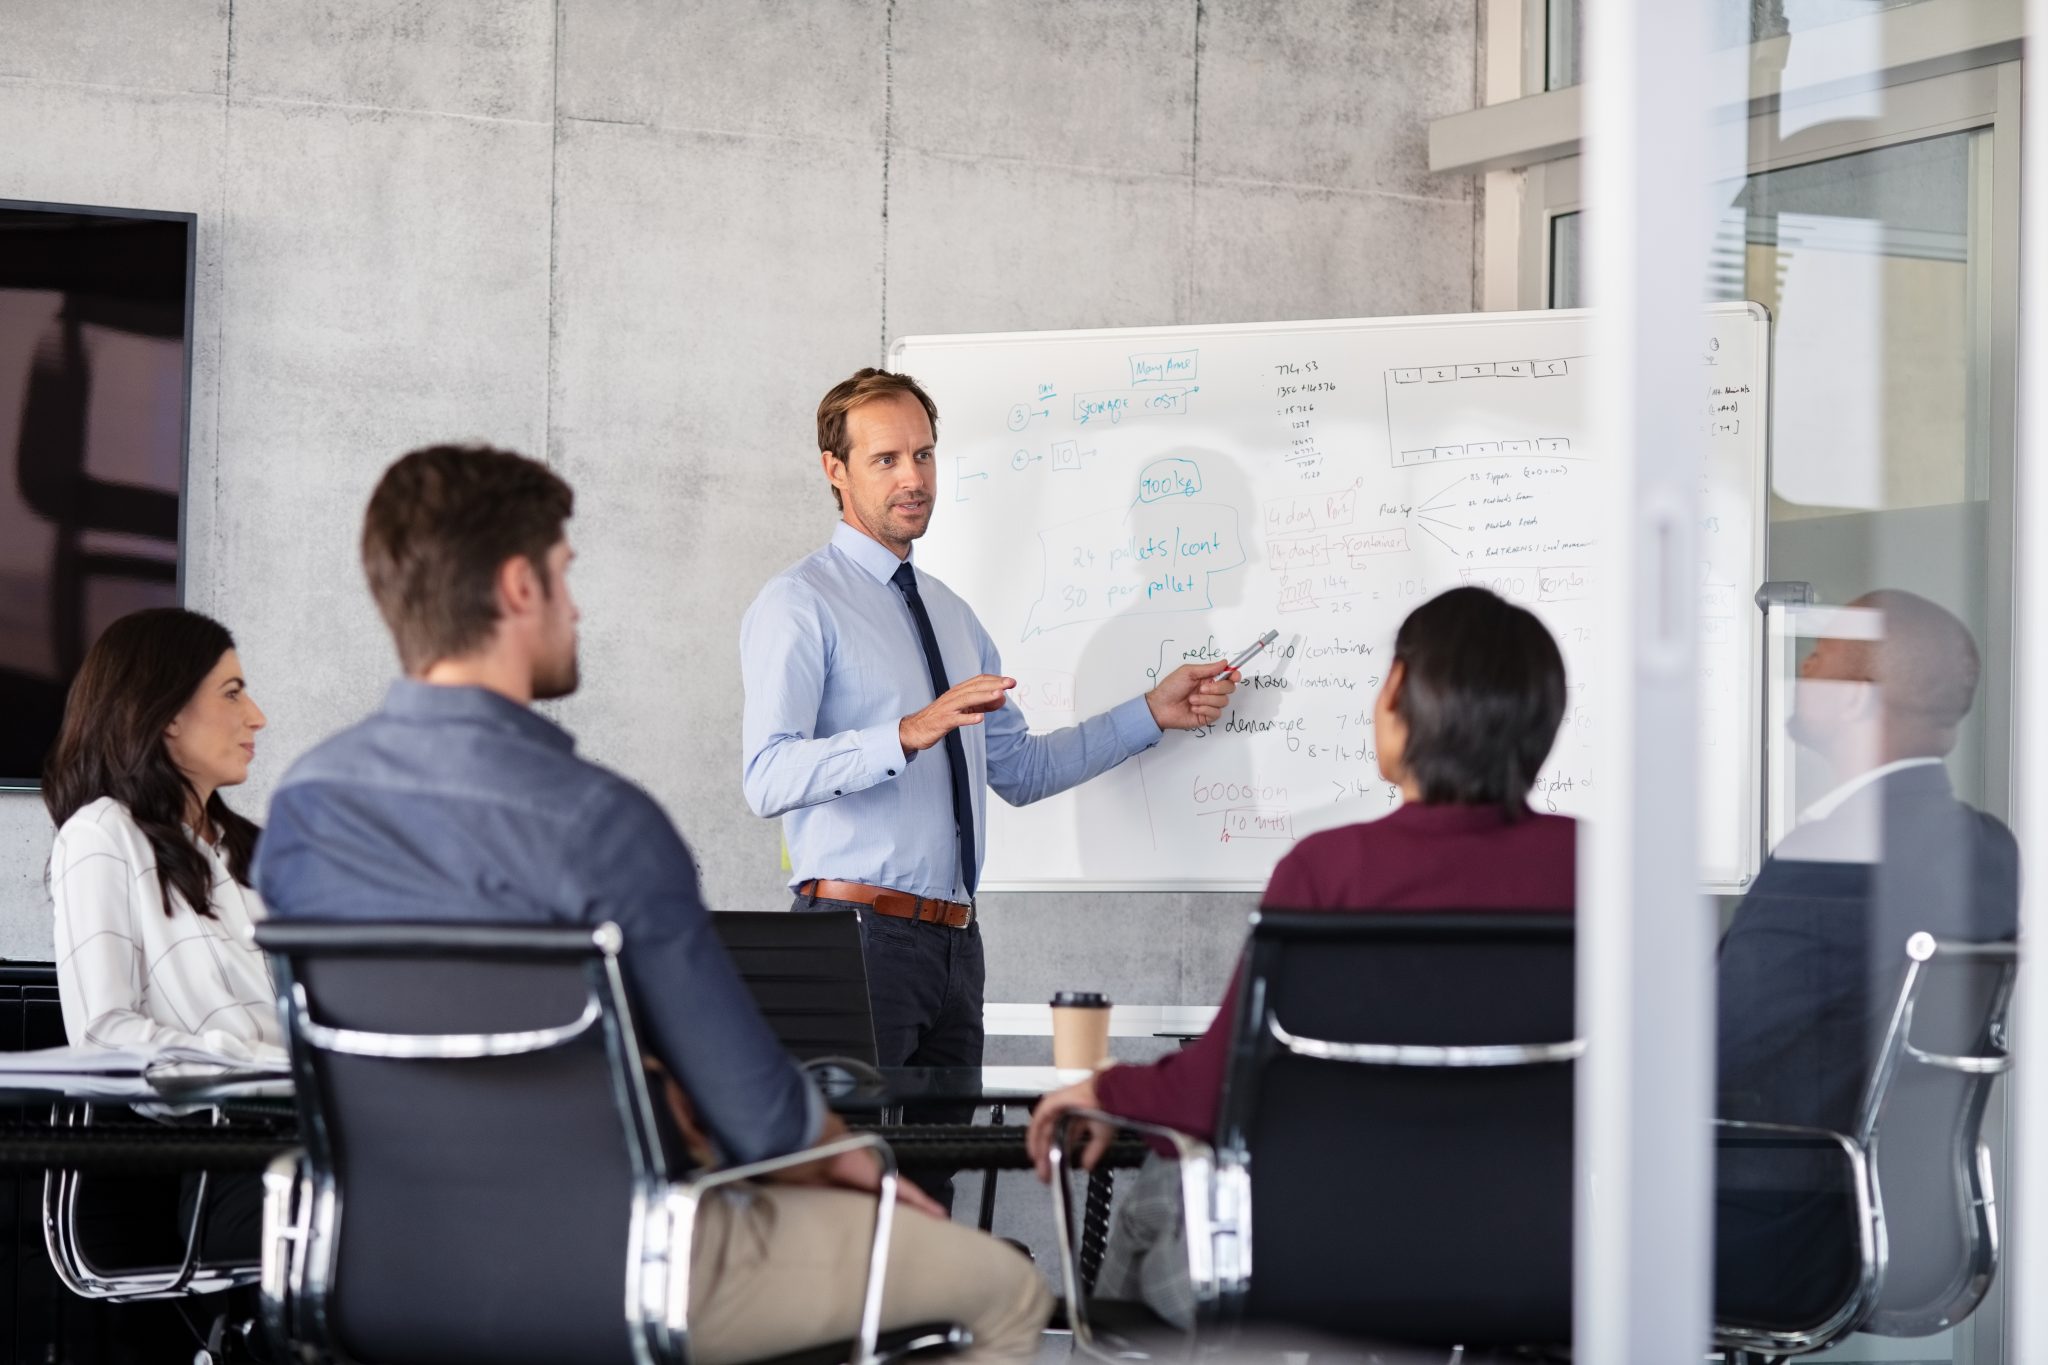 Mature businessman giving presentation to his colleagues in modern office. Formal leader presenting new project to business partners in conference room using white board. Businessman in a meeting showing business progressions in boardroom.